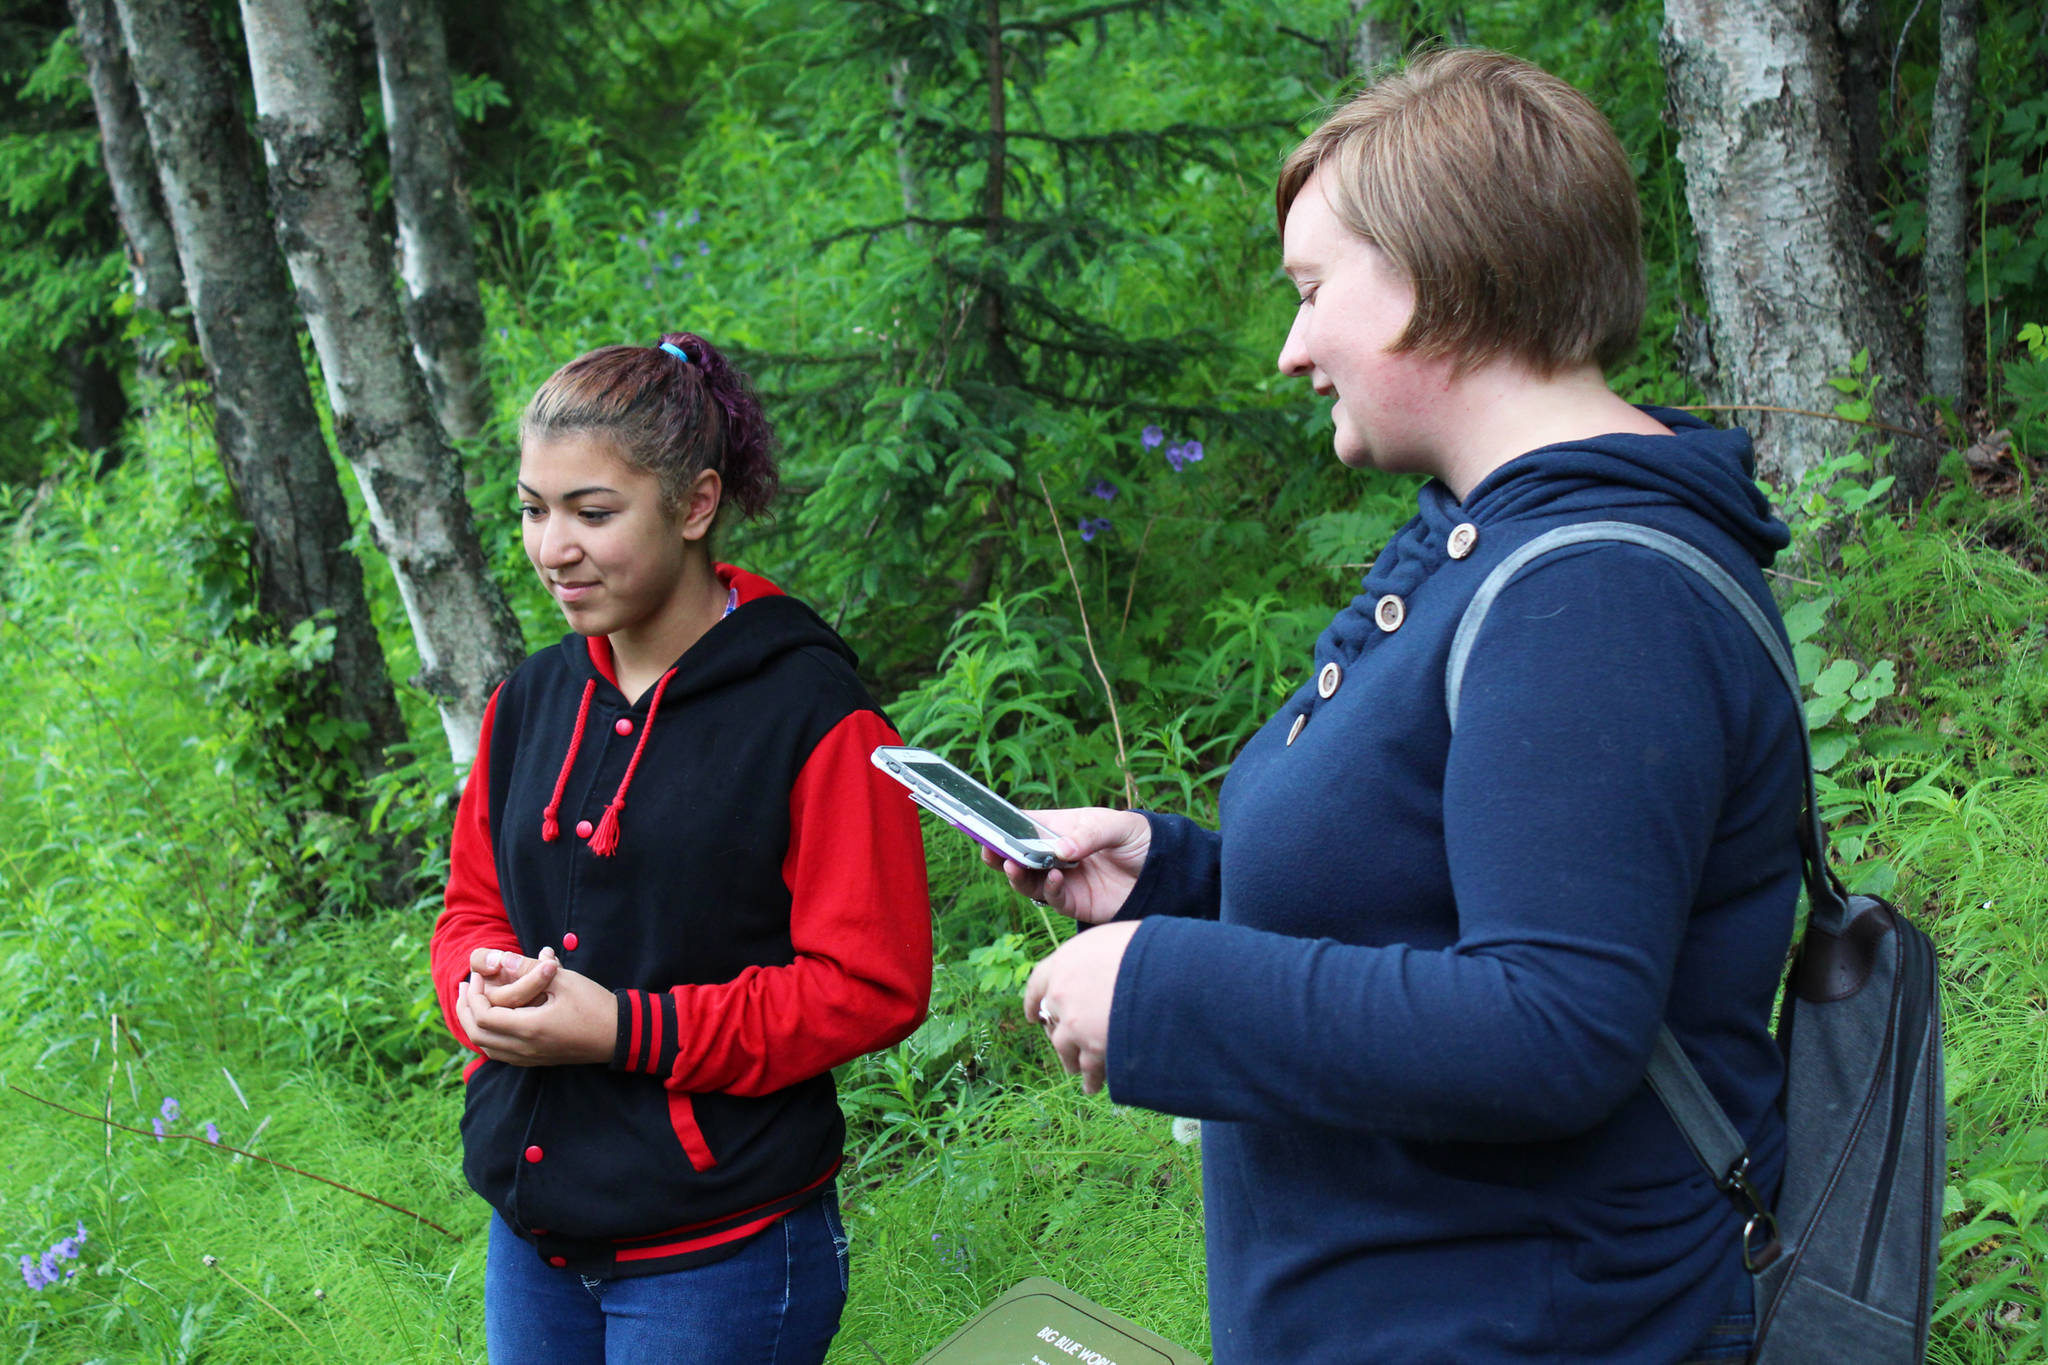 Ryanna Thurman, right, finishes listening to an oration of Kenai Central High School student Kassandra Renfrow’s poem, one of the winning entries to the Pathways of Poetry contest, Saturday, July 1, 2017 on the trail at Kenai Municipal Park in Kenai, Alaska. A panel of judges chose 12 winners out of 86 student participants, whose poems about nature are placed on signs along the trail. Scanning the codes on the signs brings up a recording of the authors reading their pieces. (Photo by Megan Pacer/Peninsula Clarion)